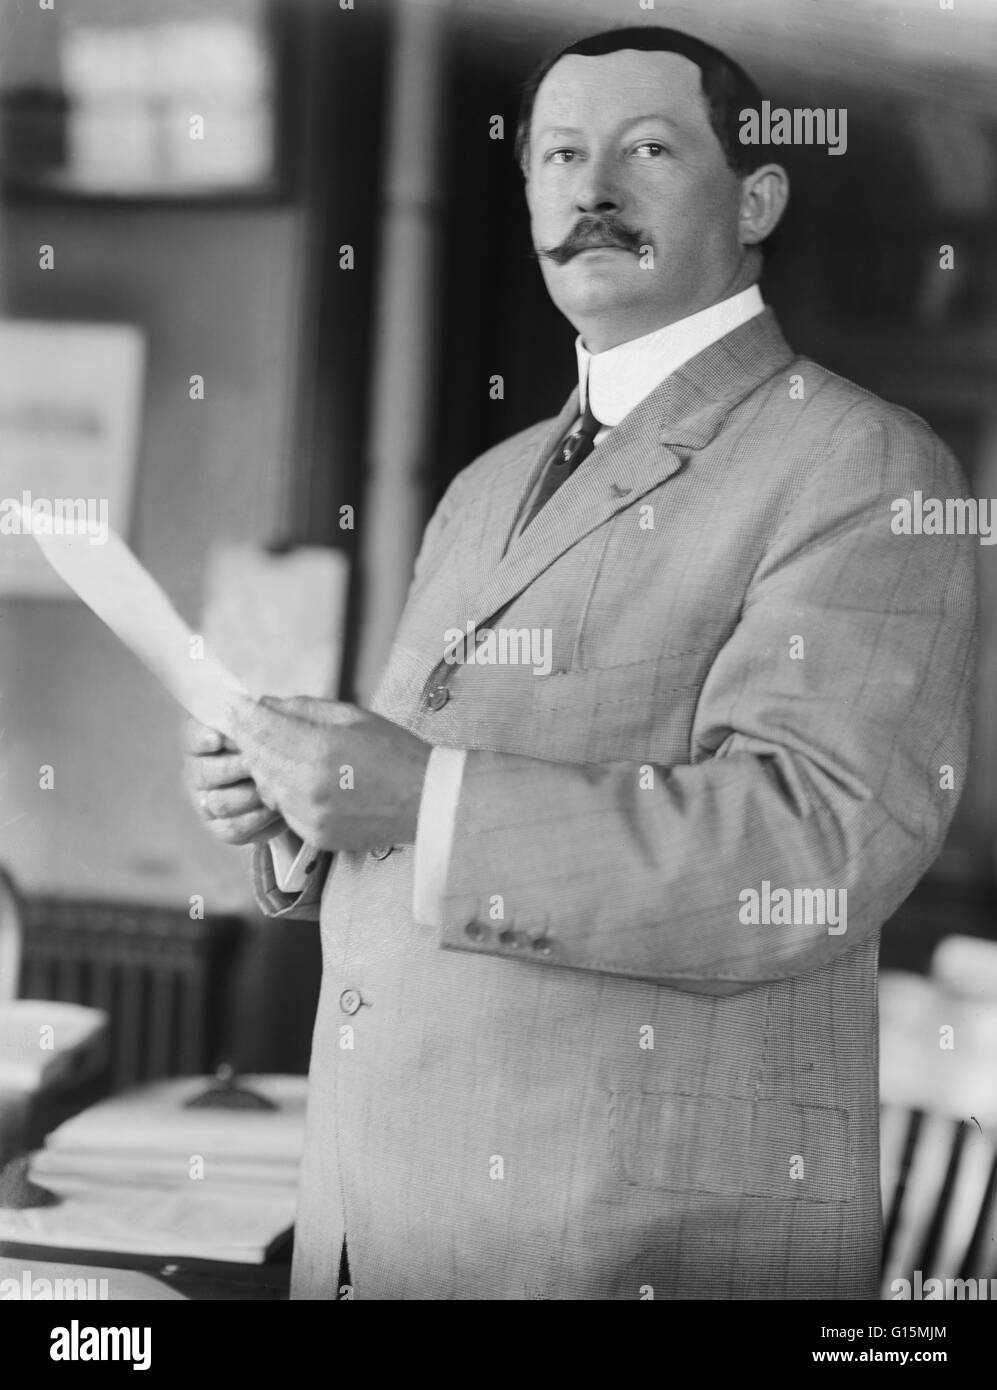 Rupert Blue (May 30, 1868 - April 12, 1948) was an American physician and soldier. He was appointed the fourth Surgeon General of the United States from 1912 to 1920. Blue spent his early years at Marine Hospital Service at the front lines of turn-of-the- Stock Photo